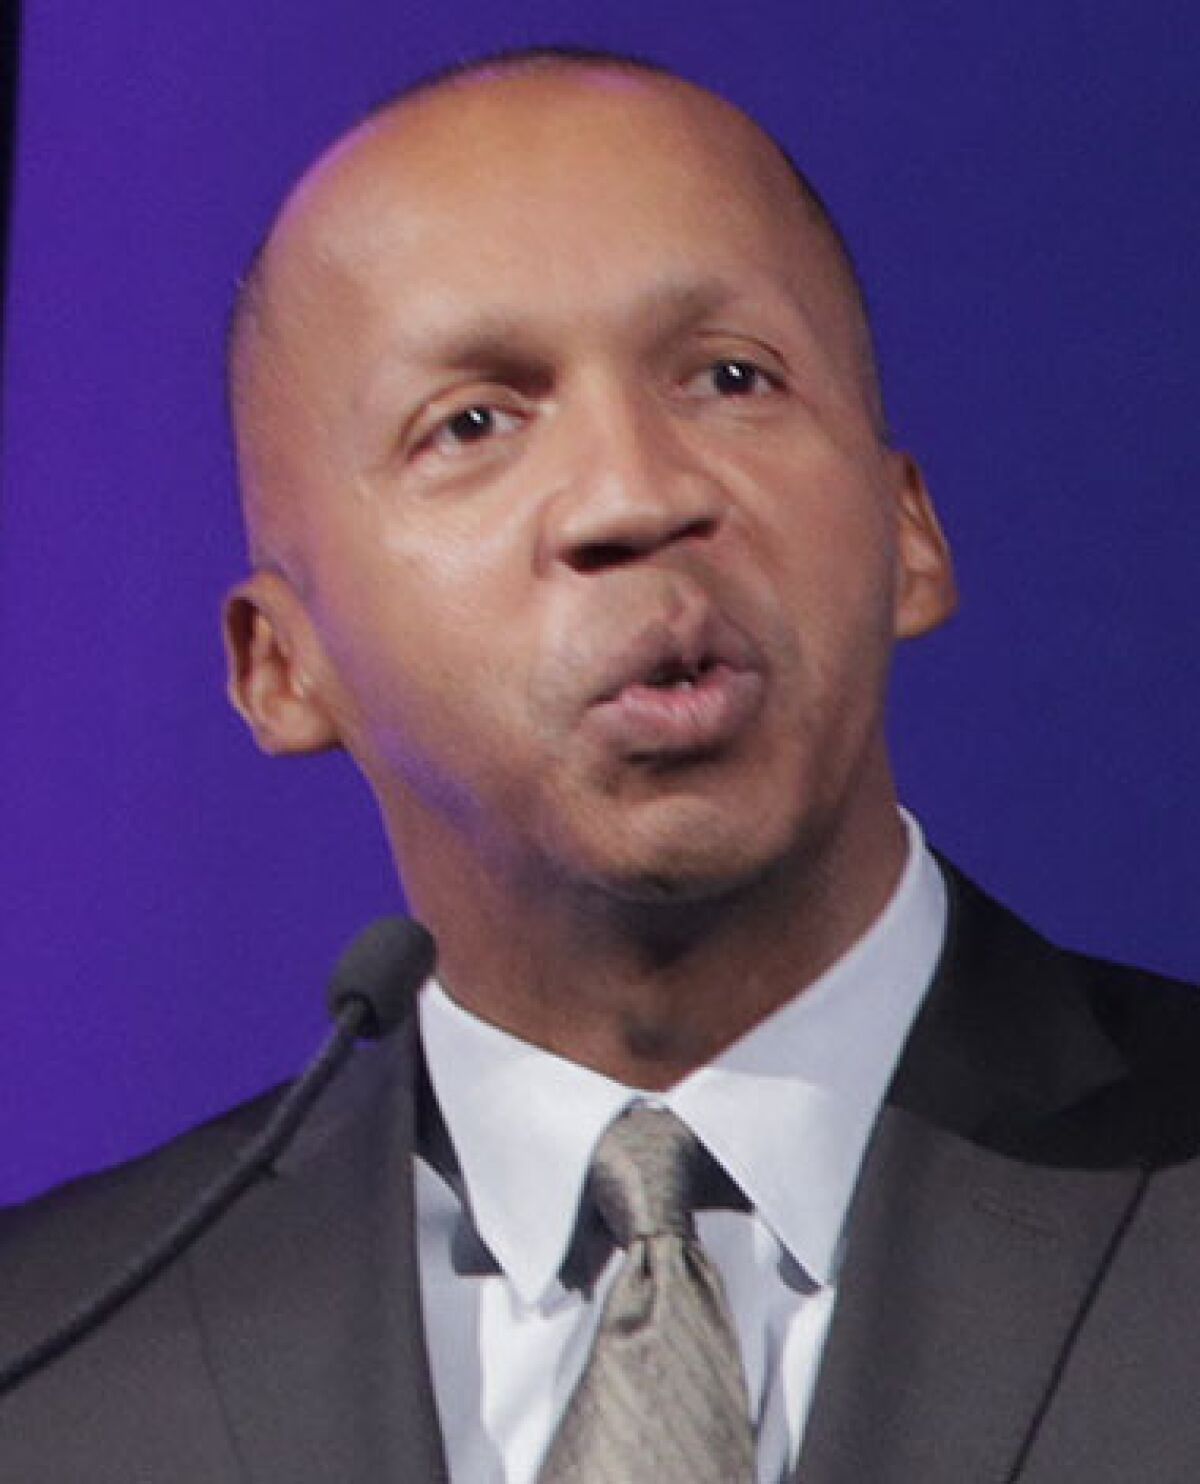 Bryan Stevenson | Founder and executive director, Equal Justice Initiative